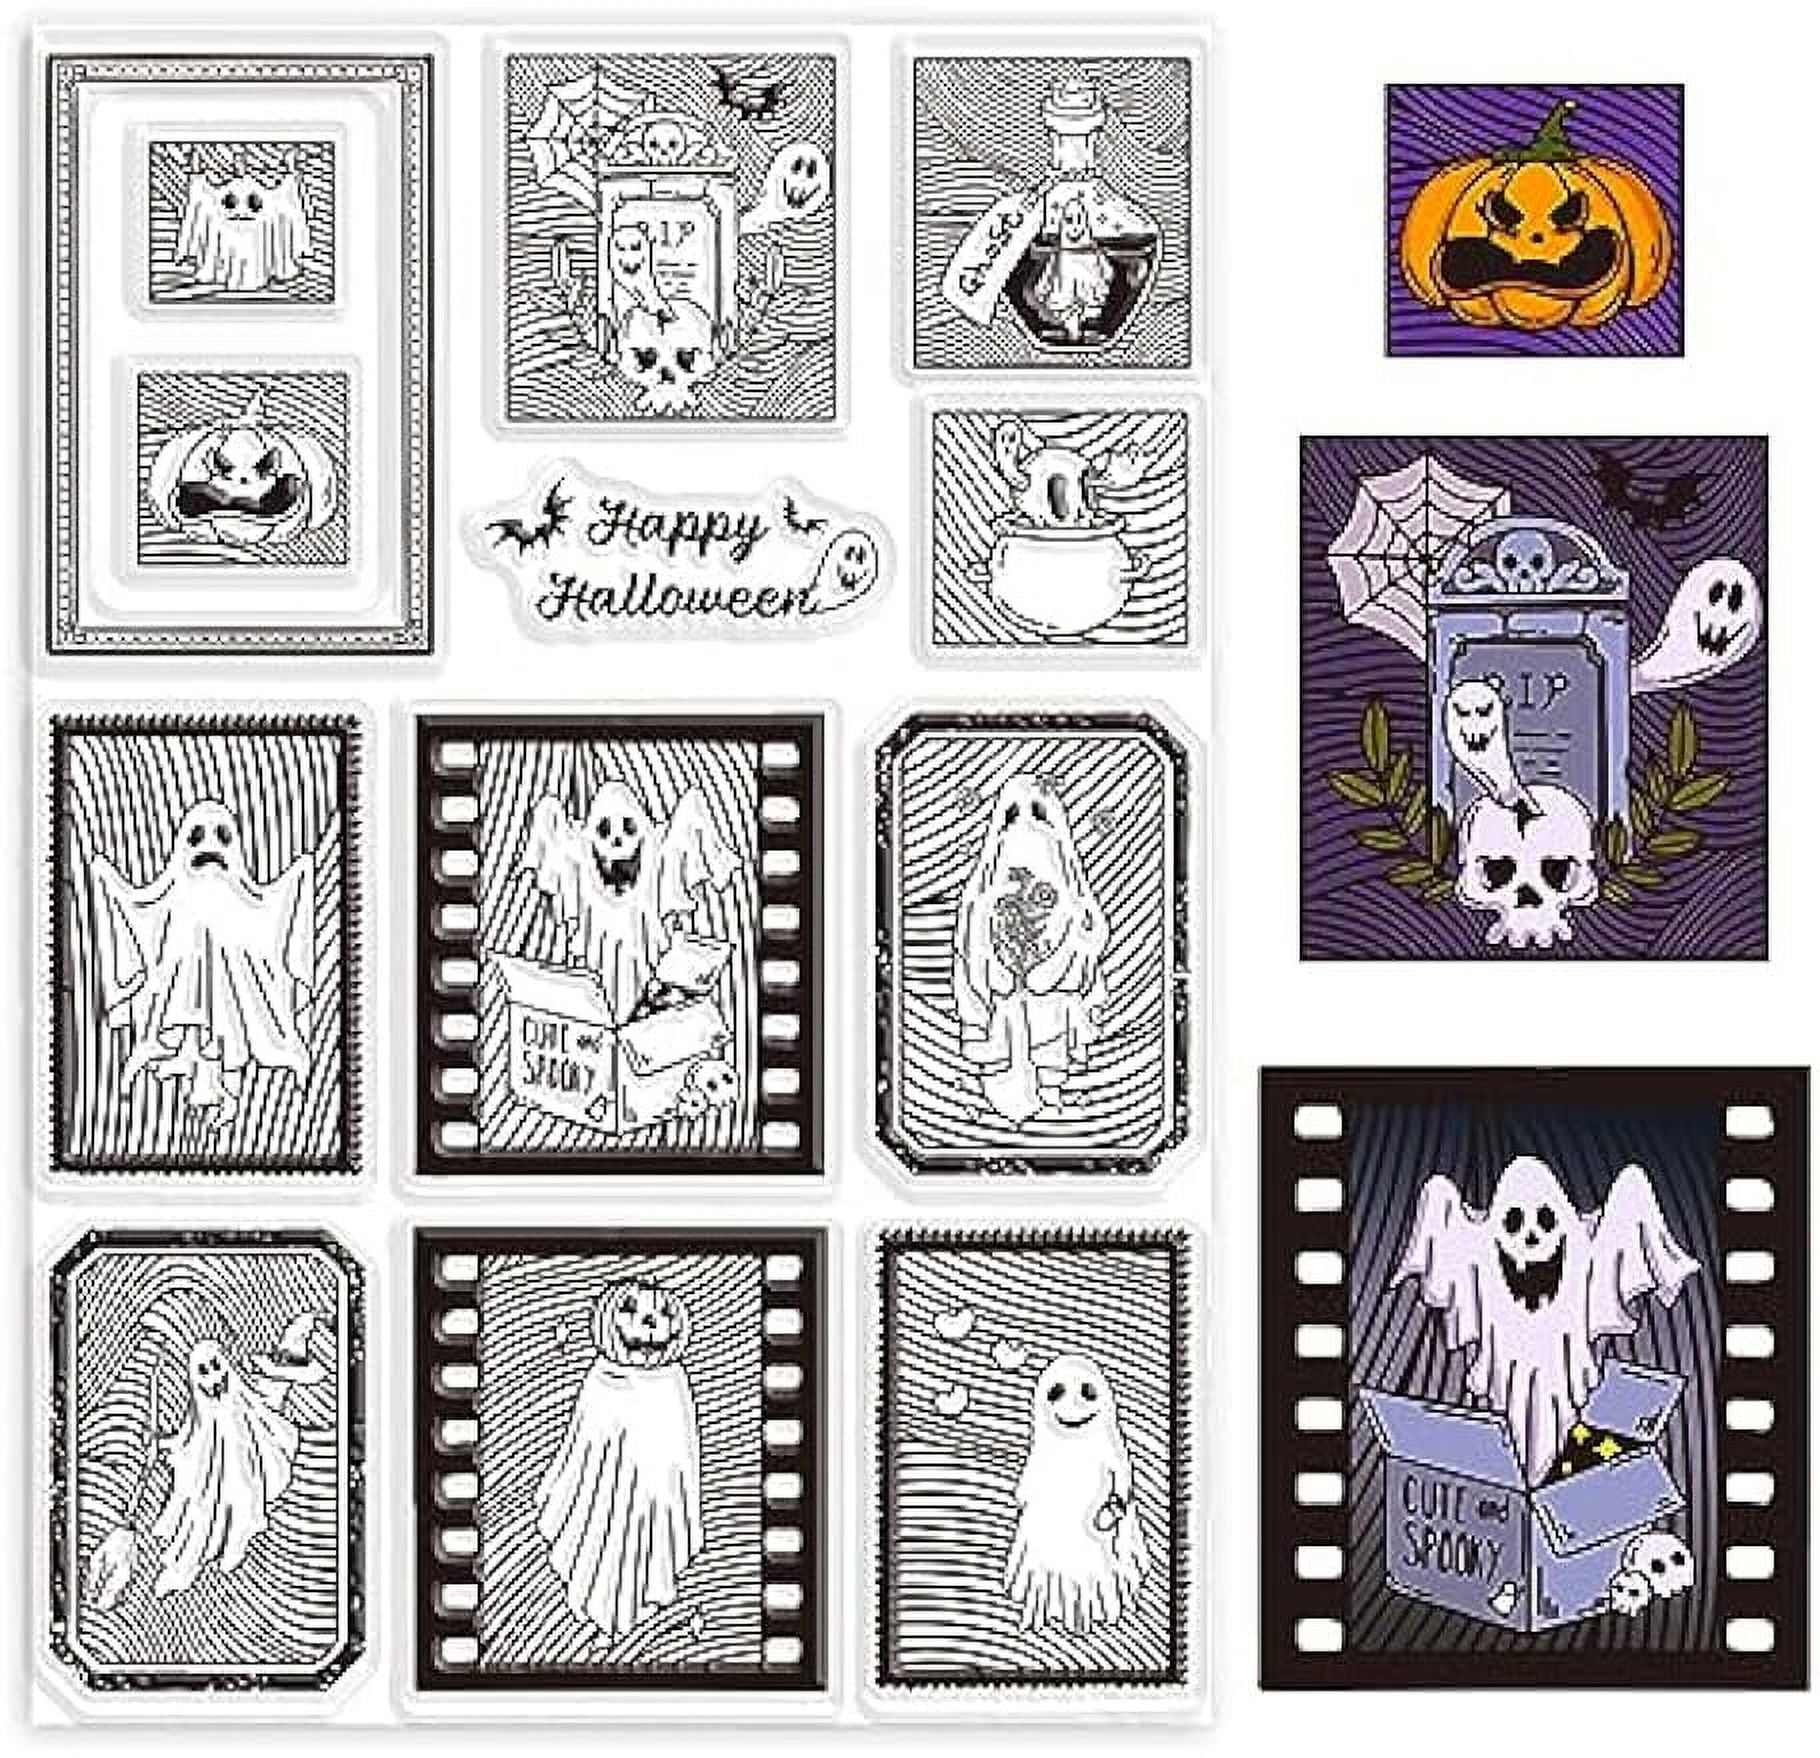  Lapoo Stamps and Dies for Card Making, Christmas Dress DIY  Scrapbooking Arts Crafts, Metal Cutting Dies Clear Stamps Sets Arts  Supplies Silicone Gifts for Christmas, Thanksgiving, Halloween (SC048) :  Arts